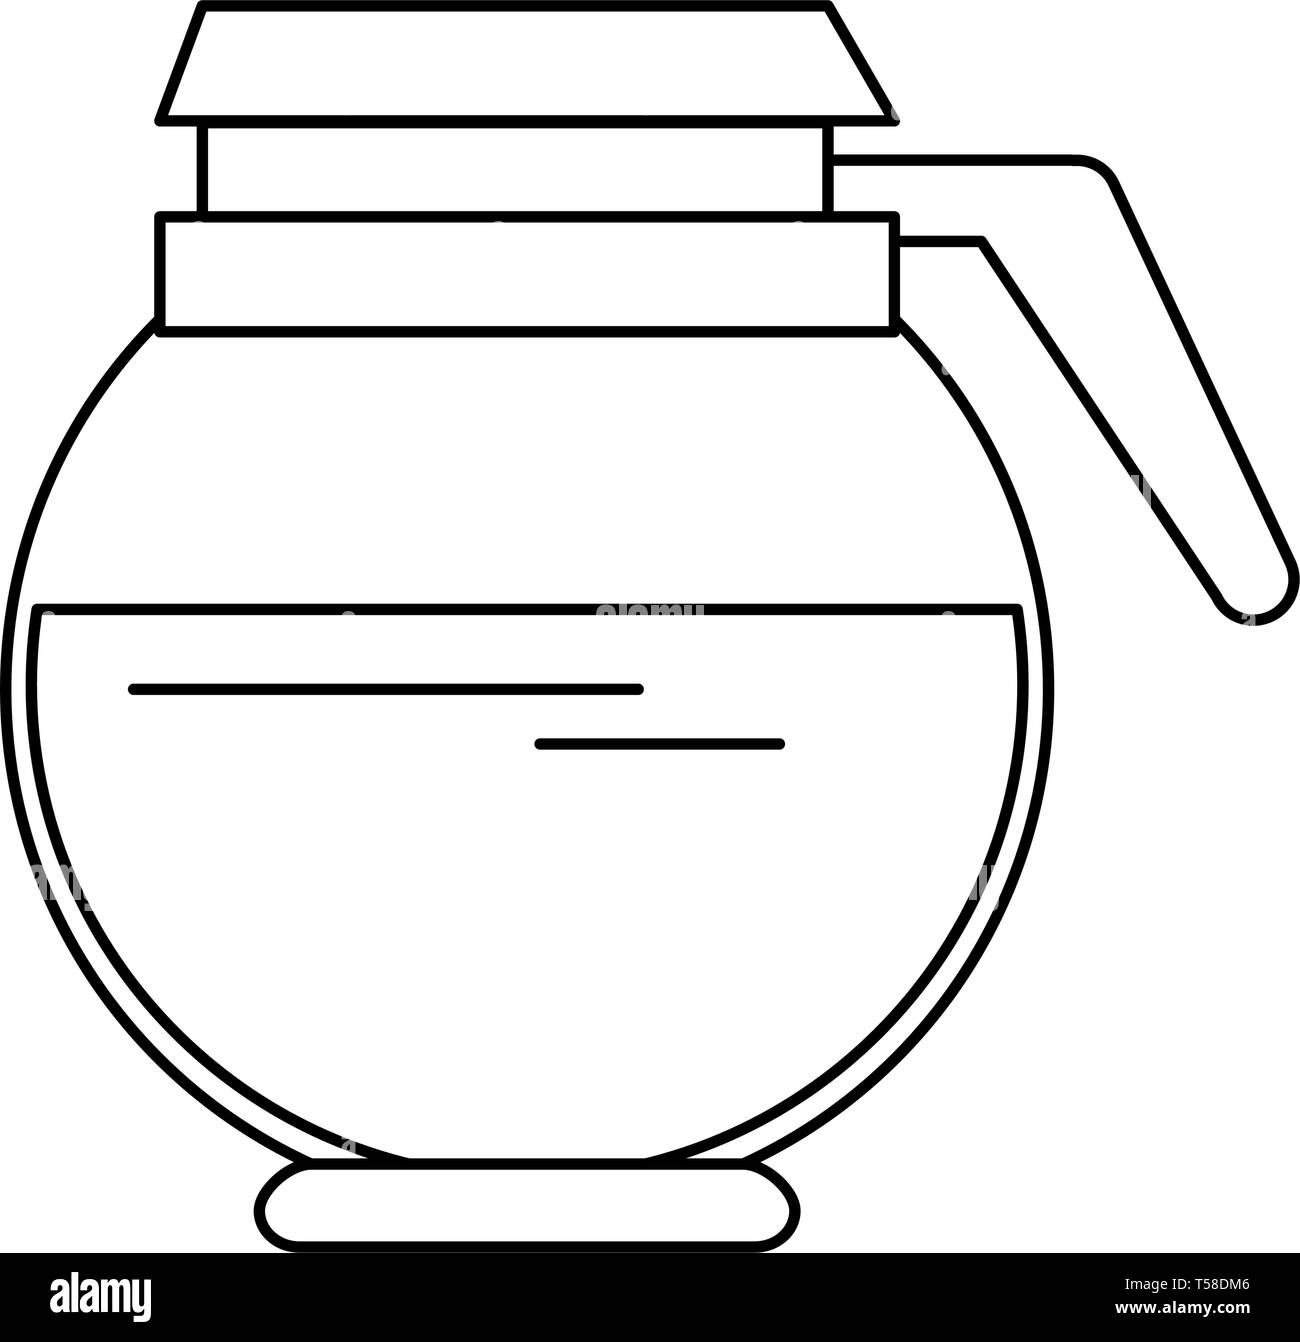 Coffee pot full hot drink isolated in black and white Stock Vector